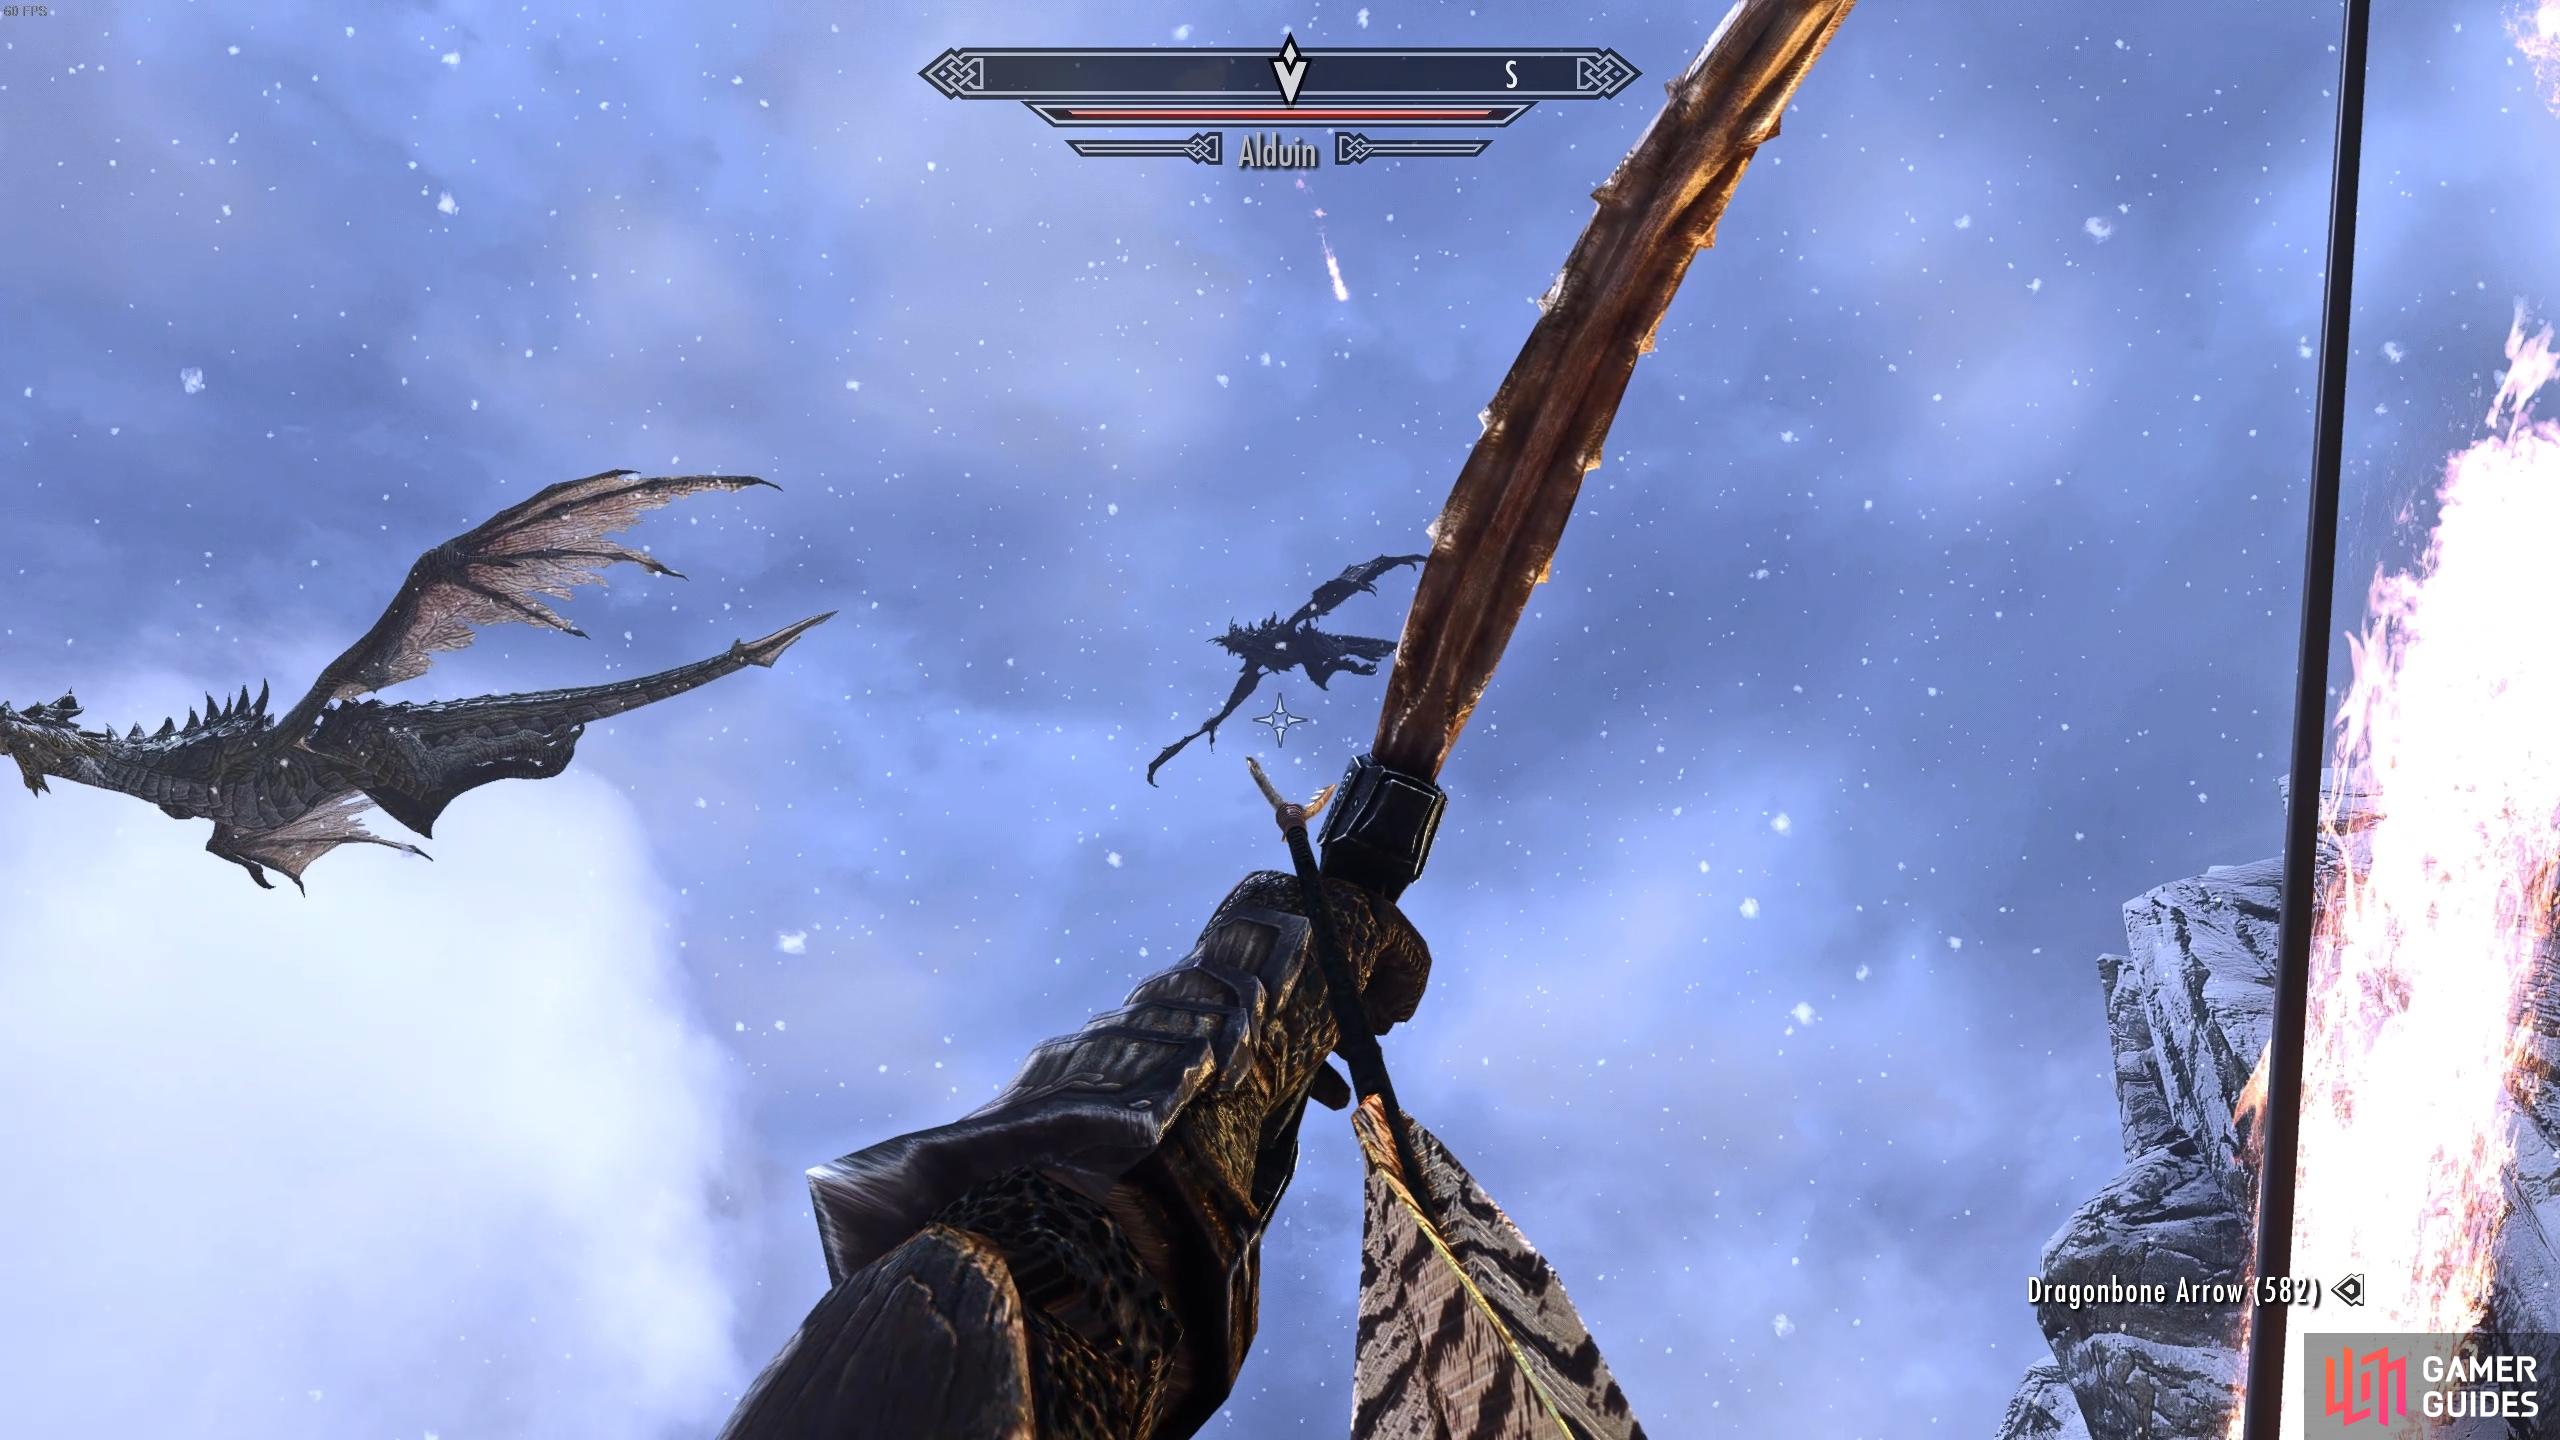 You can shoot Alduin while he's flying, but you'll find it difficult.